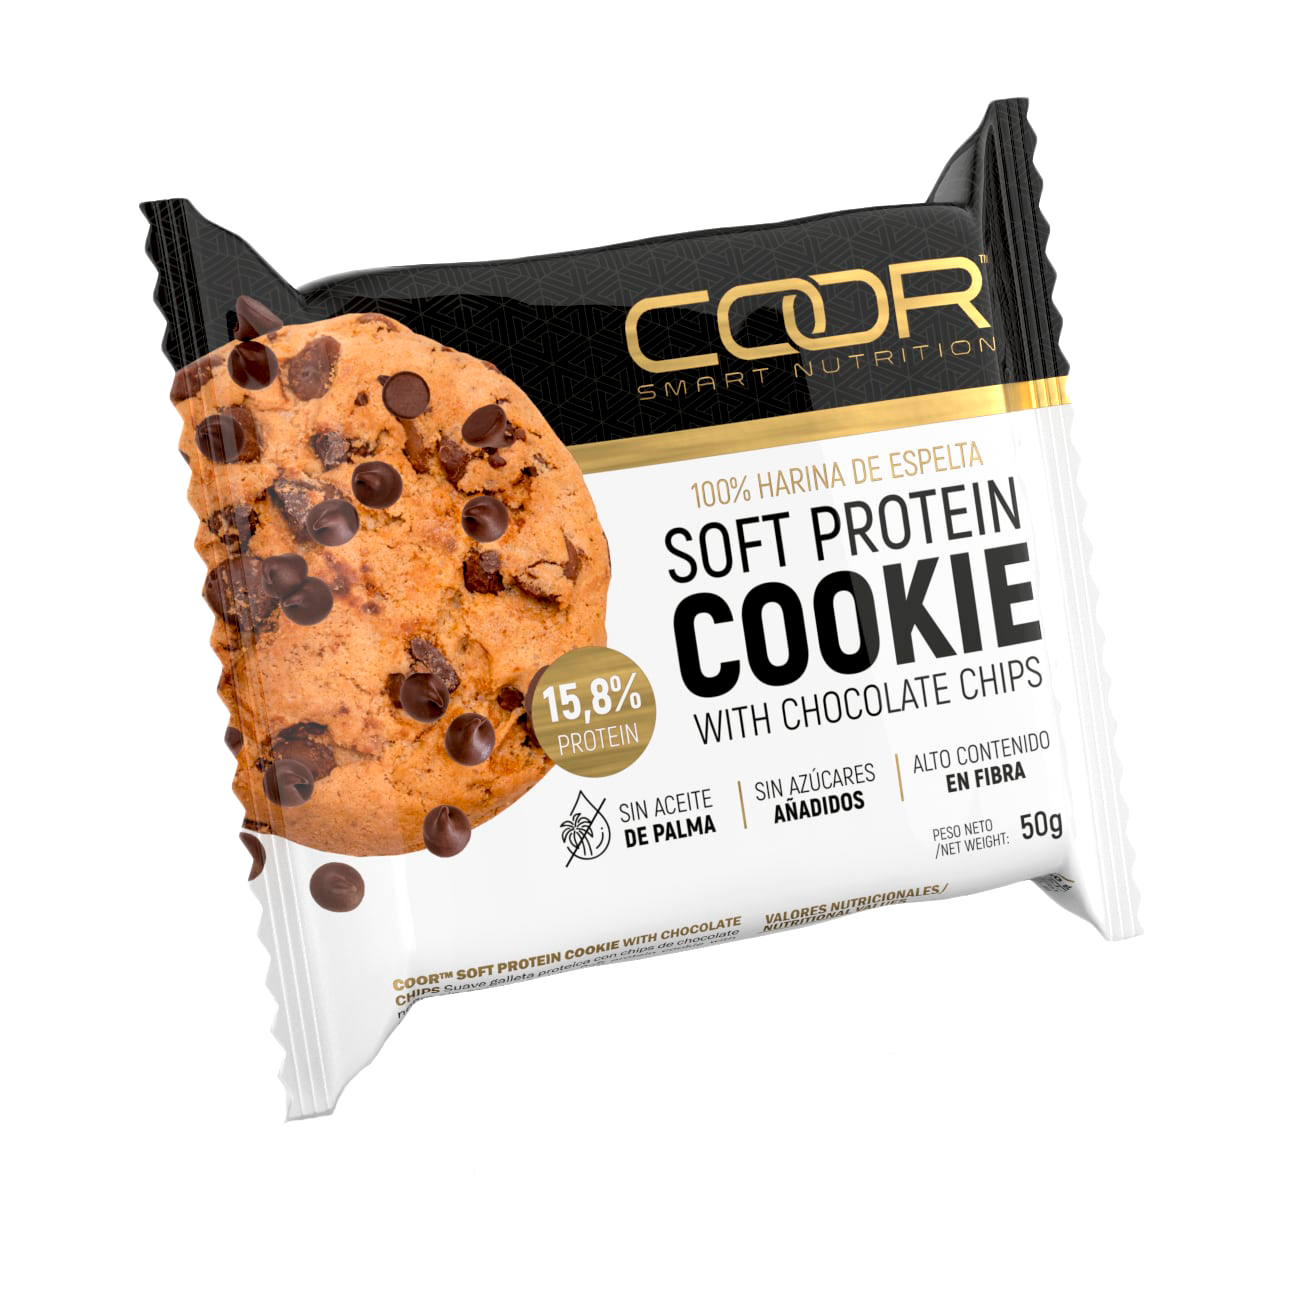 Soft protein Cookie Chocolate Coor